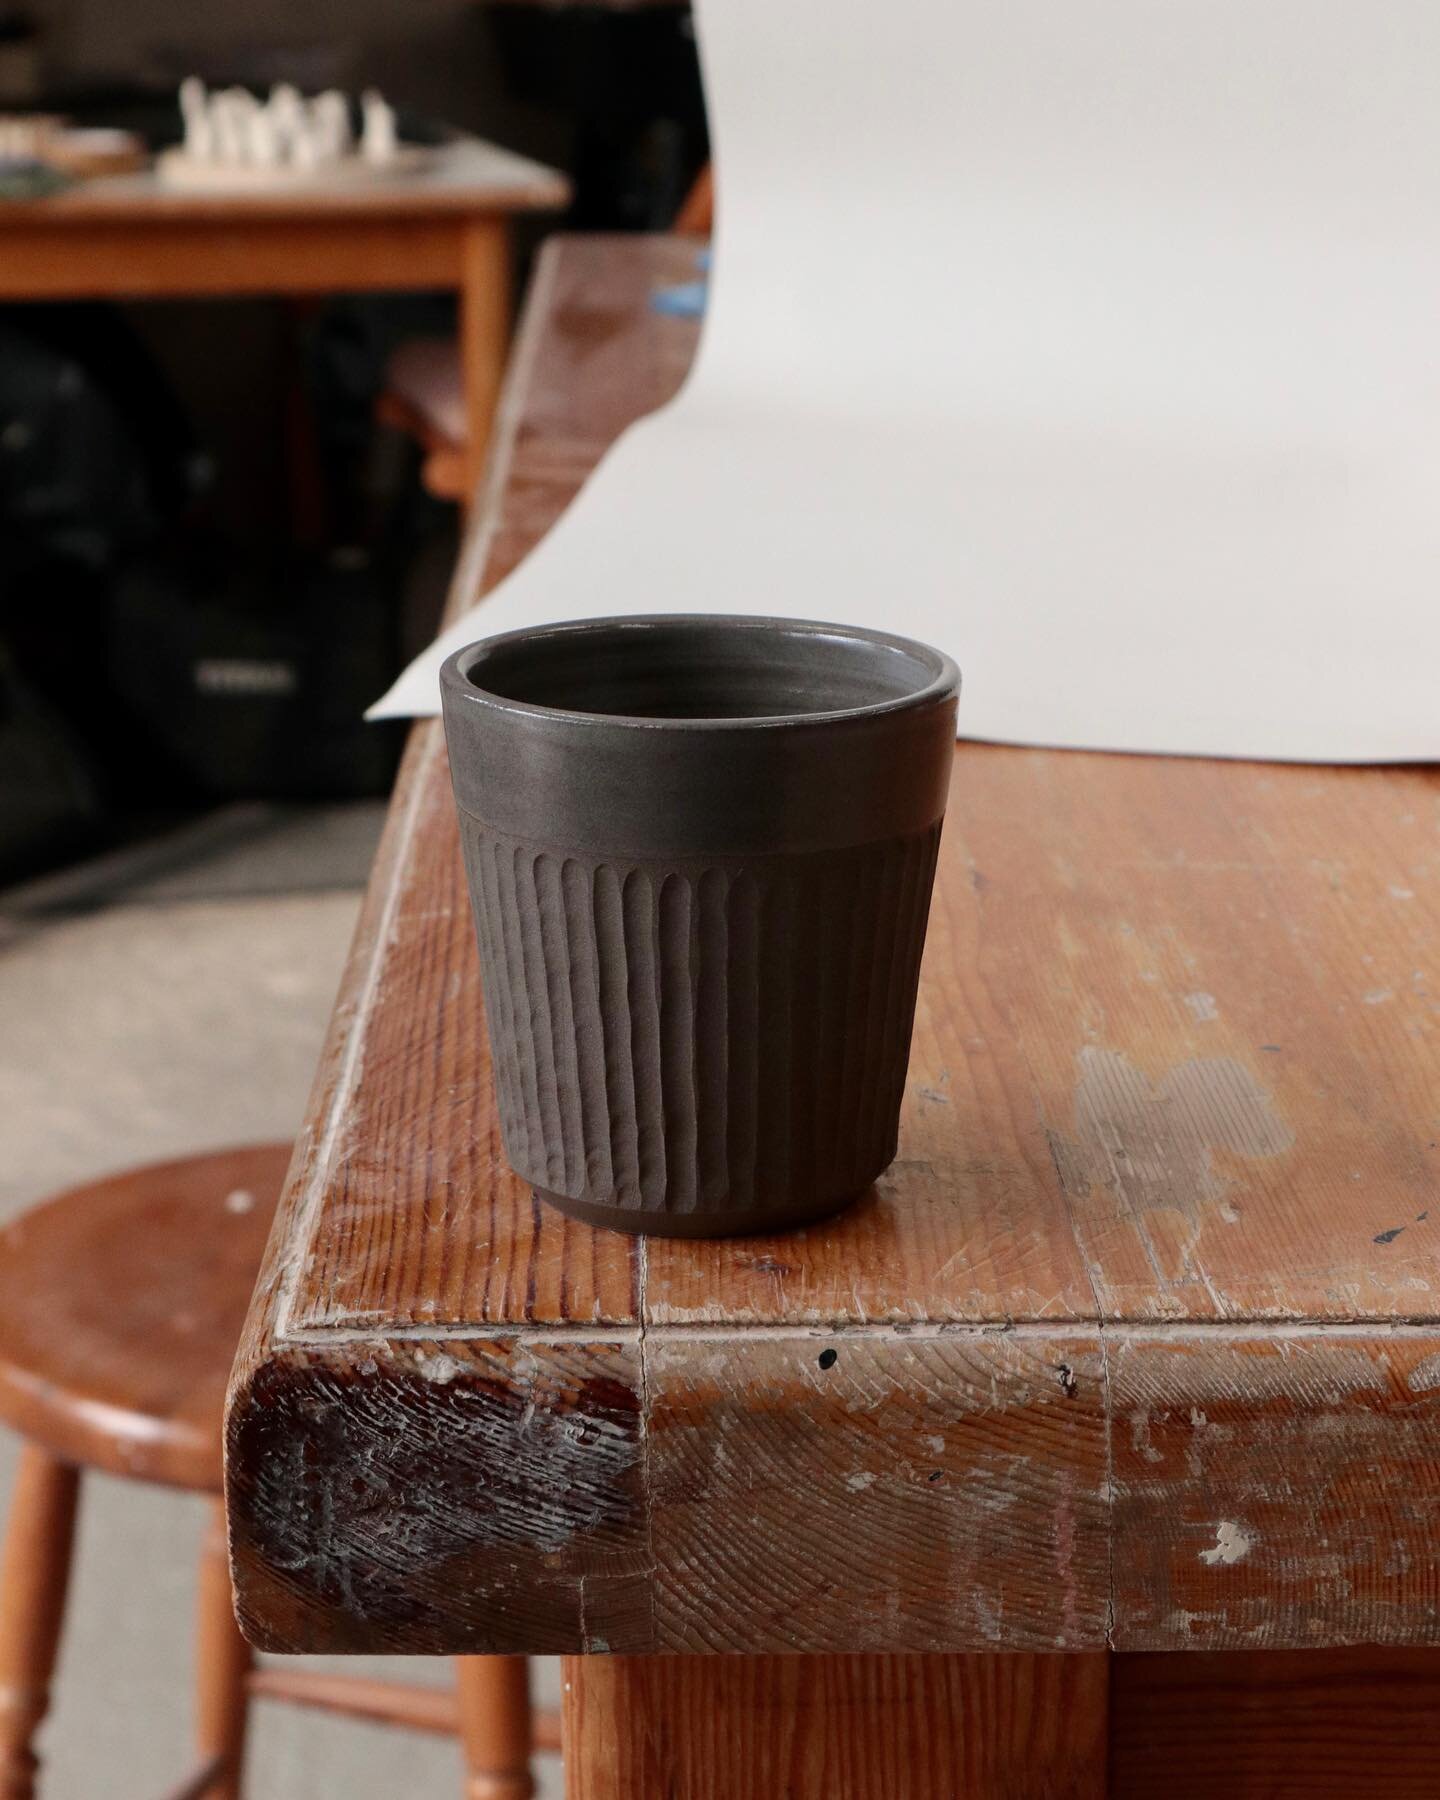 An experiment from the past couple of months. I&rsquo;ve been trying to get a good fluted/ chamfered finish, I&rsquo;m not quite there but this cup has a texture made for stroking. 
I think the way to improve this design is to invest in even more too